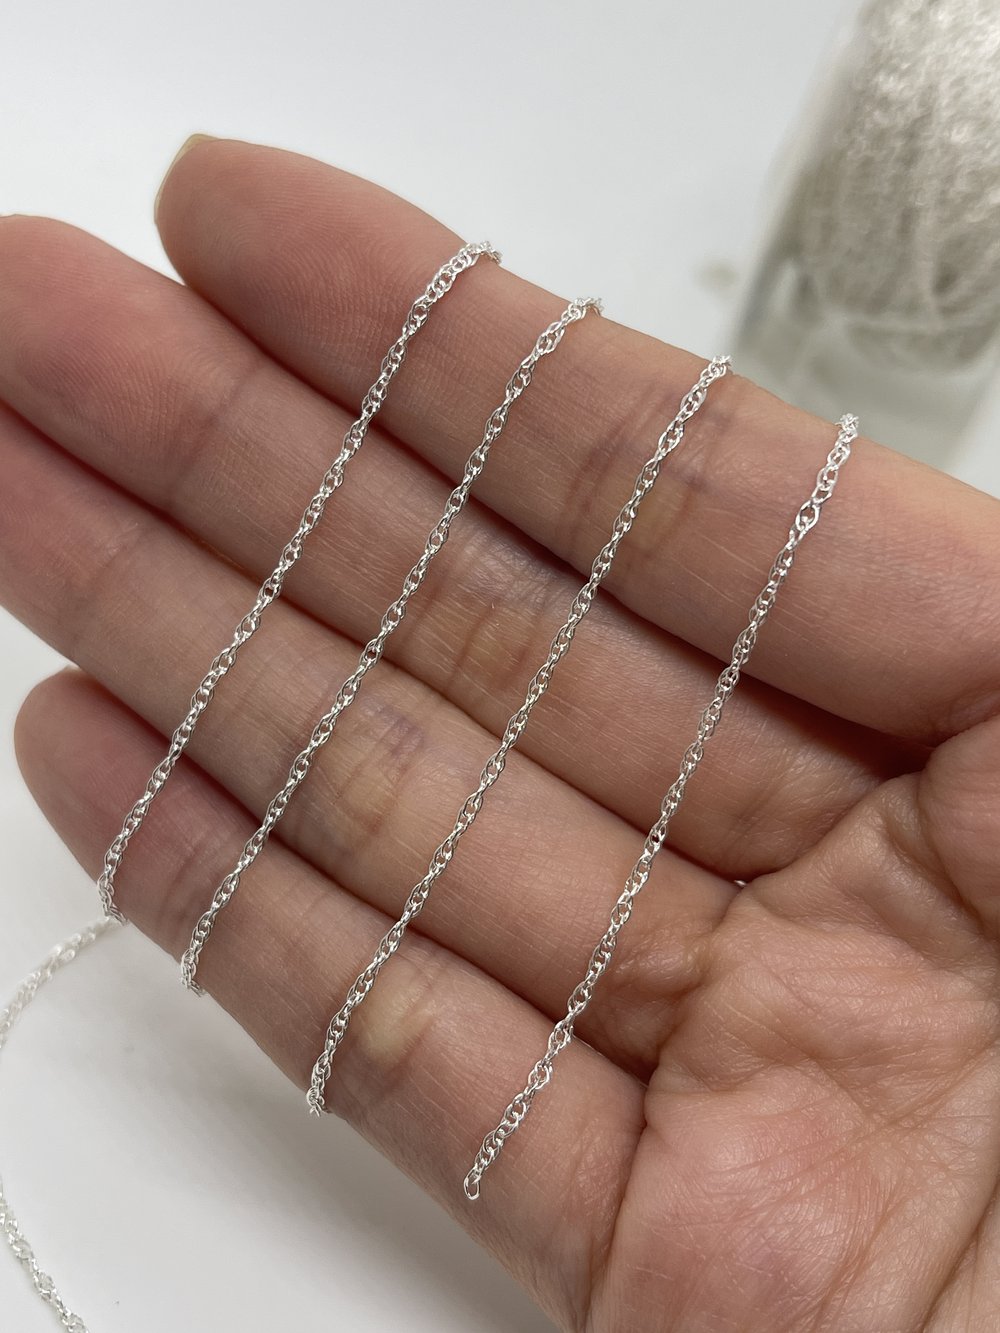 Rope Chain - Sterling Silver